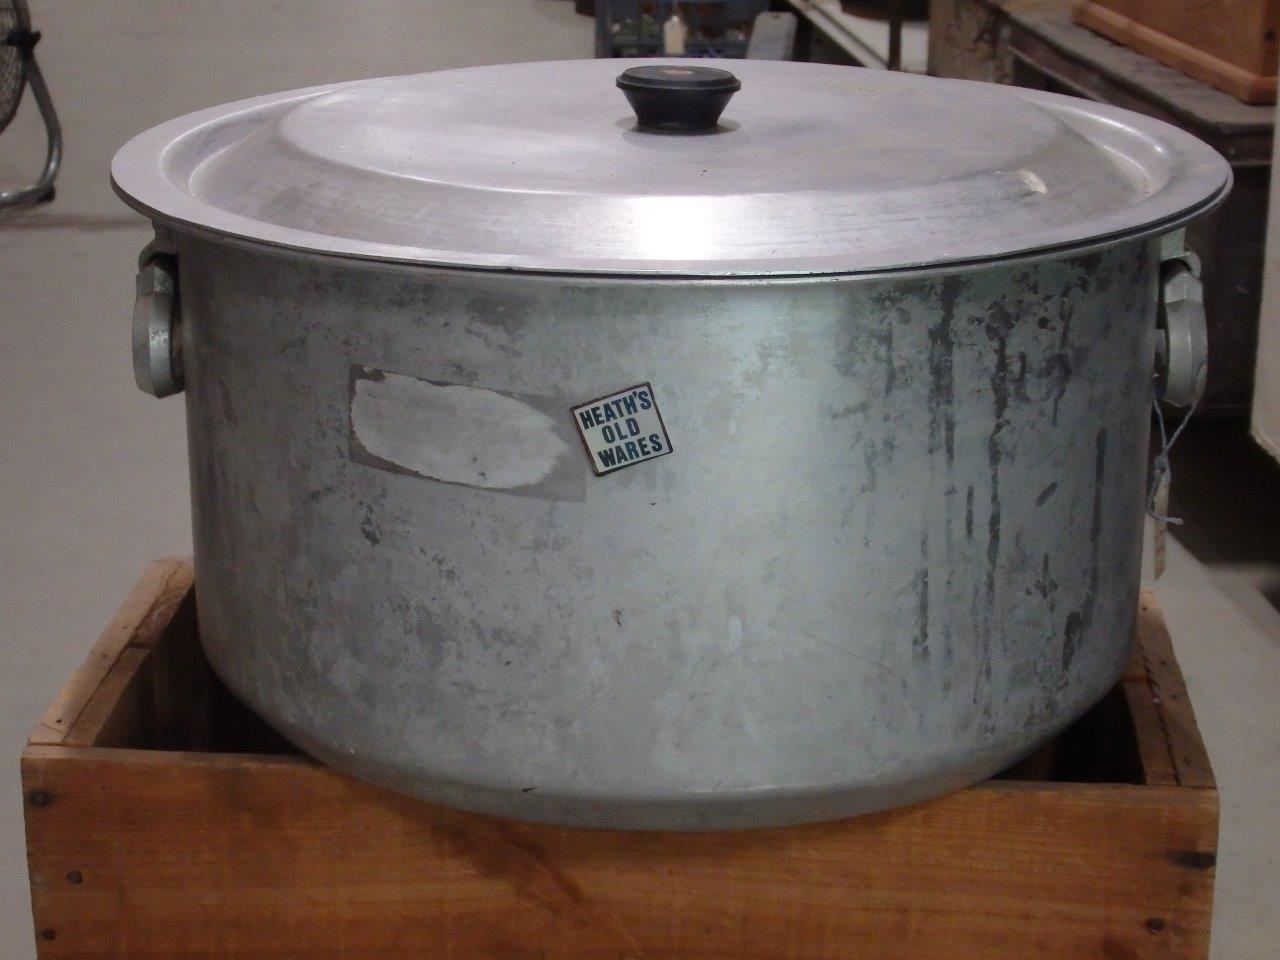 Huge aluminium boiler stock pot for sale at Heath's Old Wares , Collectables and Industrial Antiques 19-21 Broadway Burringbar, Open 7 Days Ph 0266771181